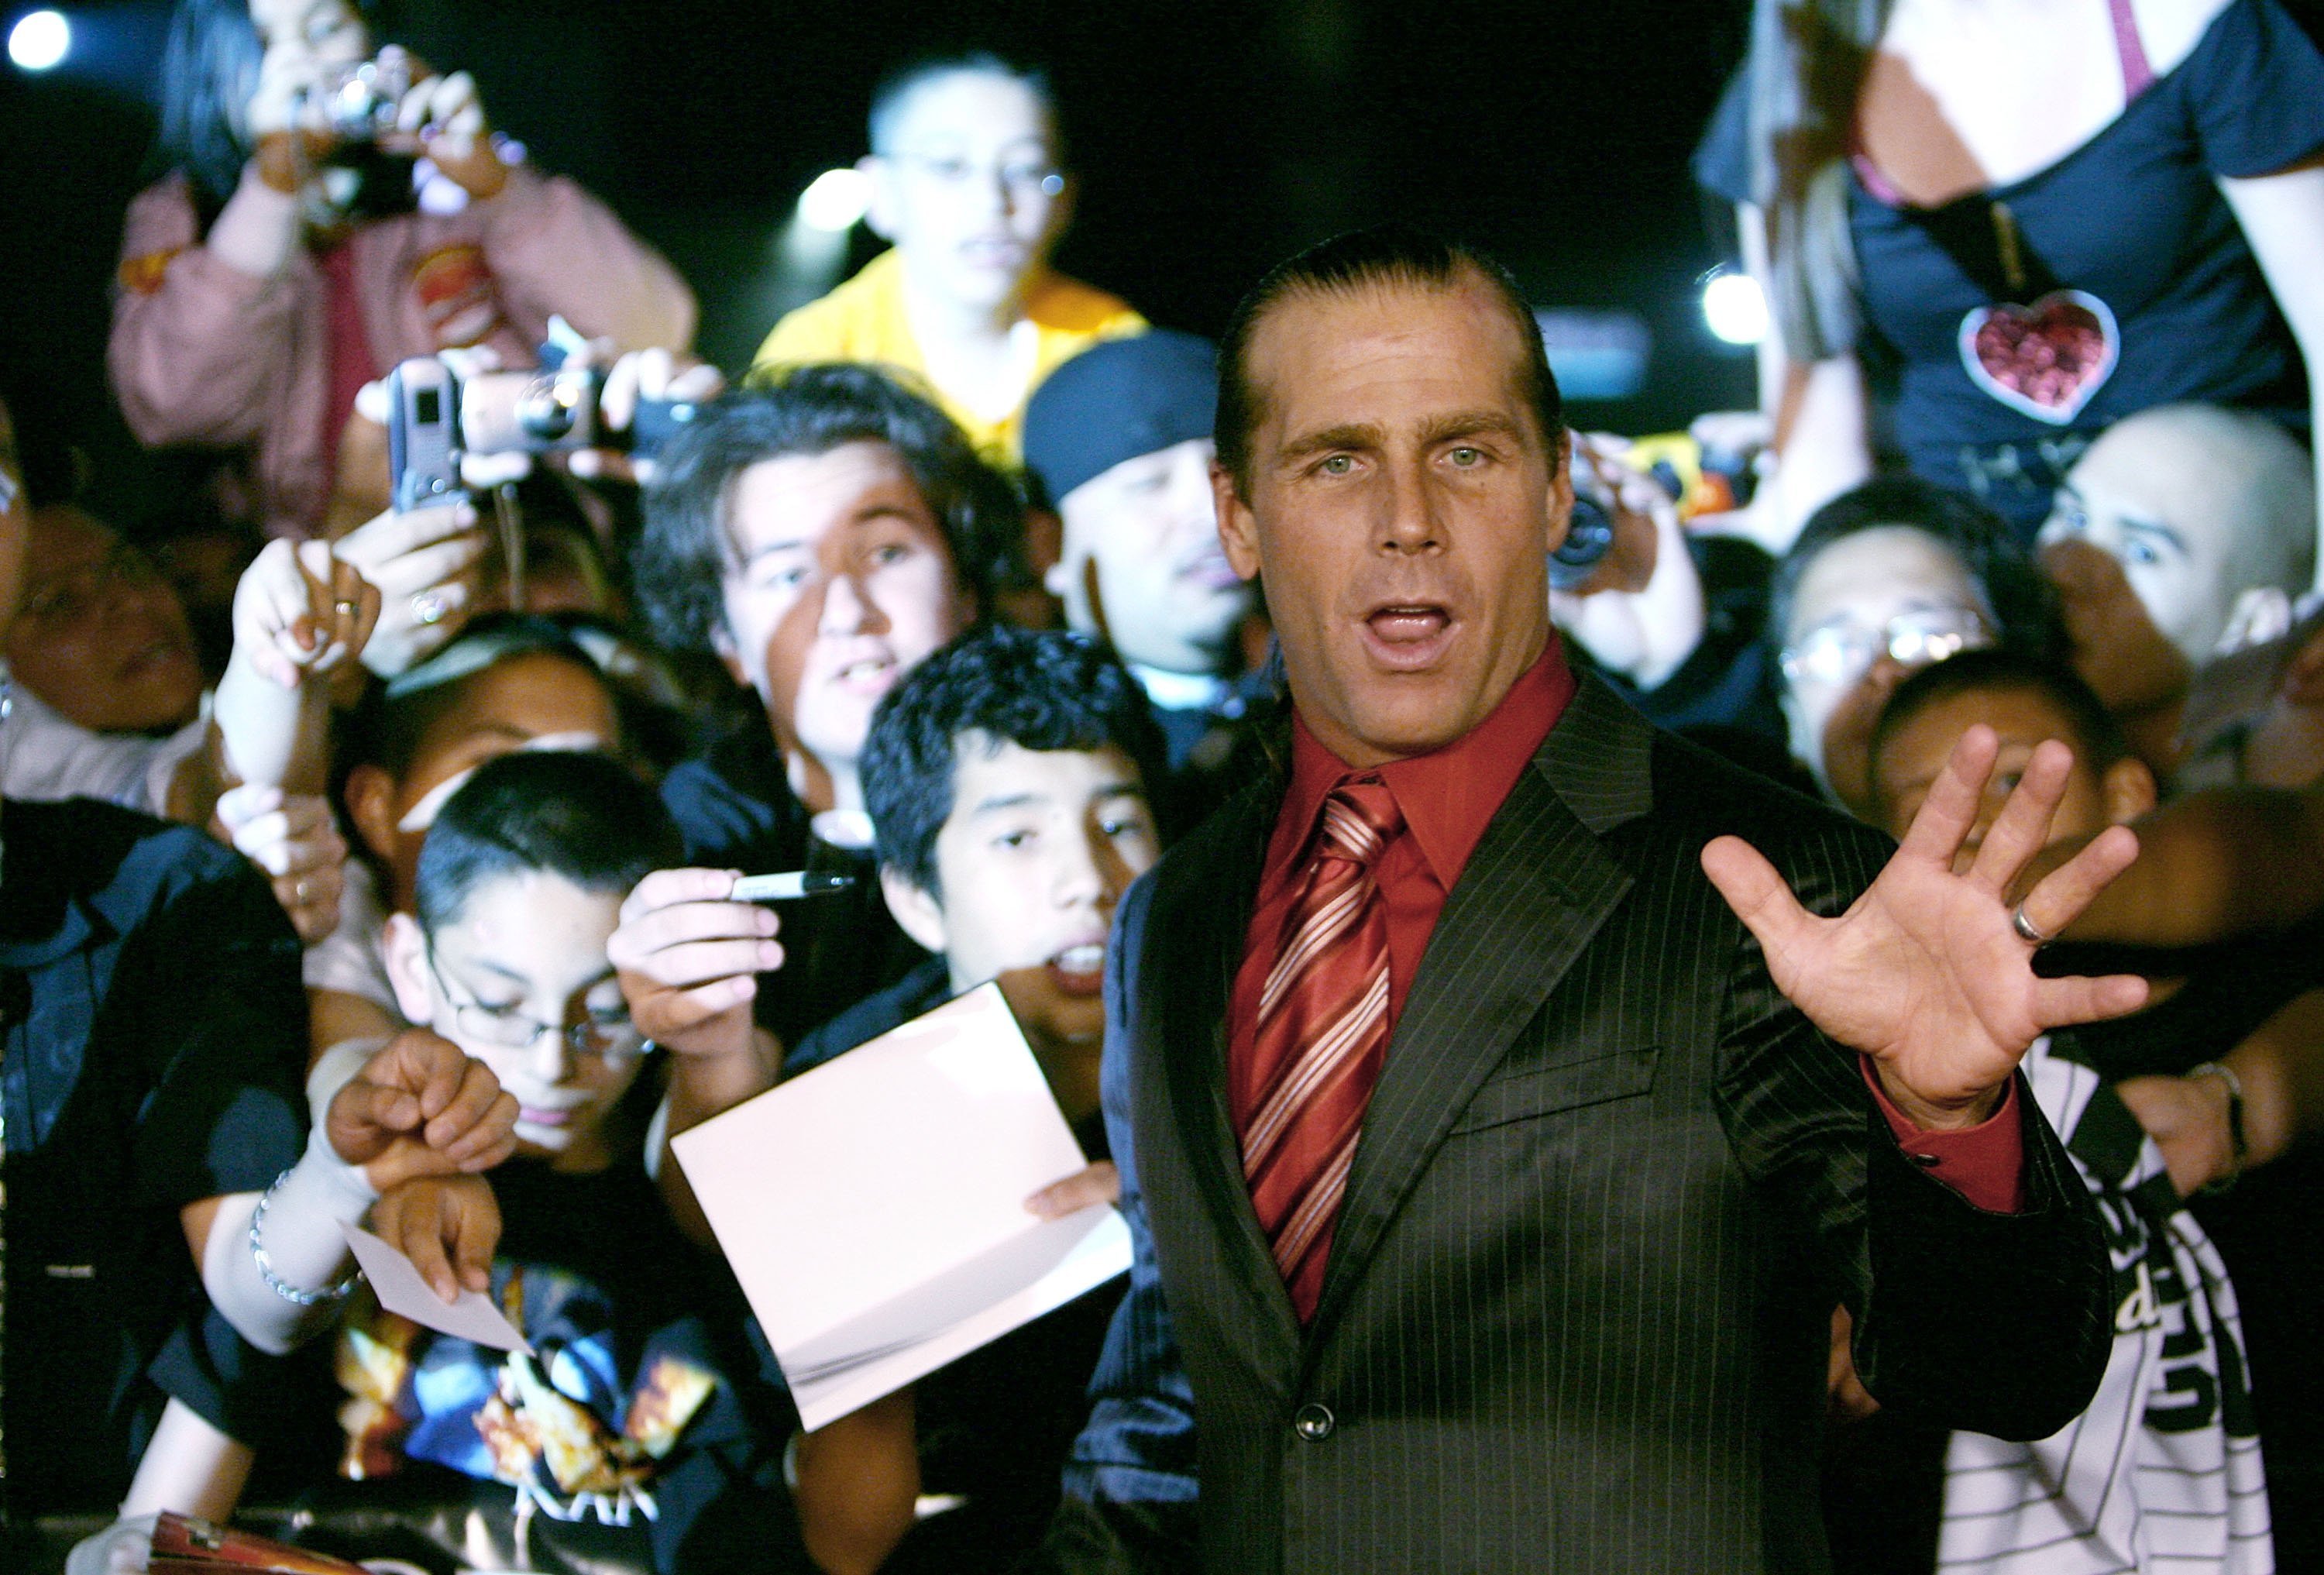 Shawn Michaels Wraps Filming For ‘The Marine 6’, Which SD Live Superstar Had The Best Holiday Attire?